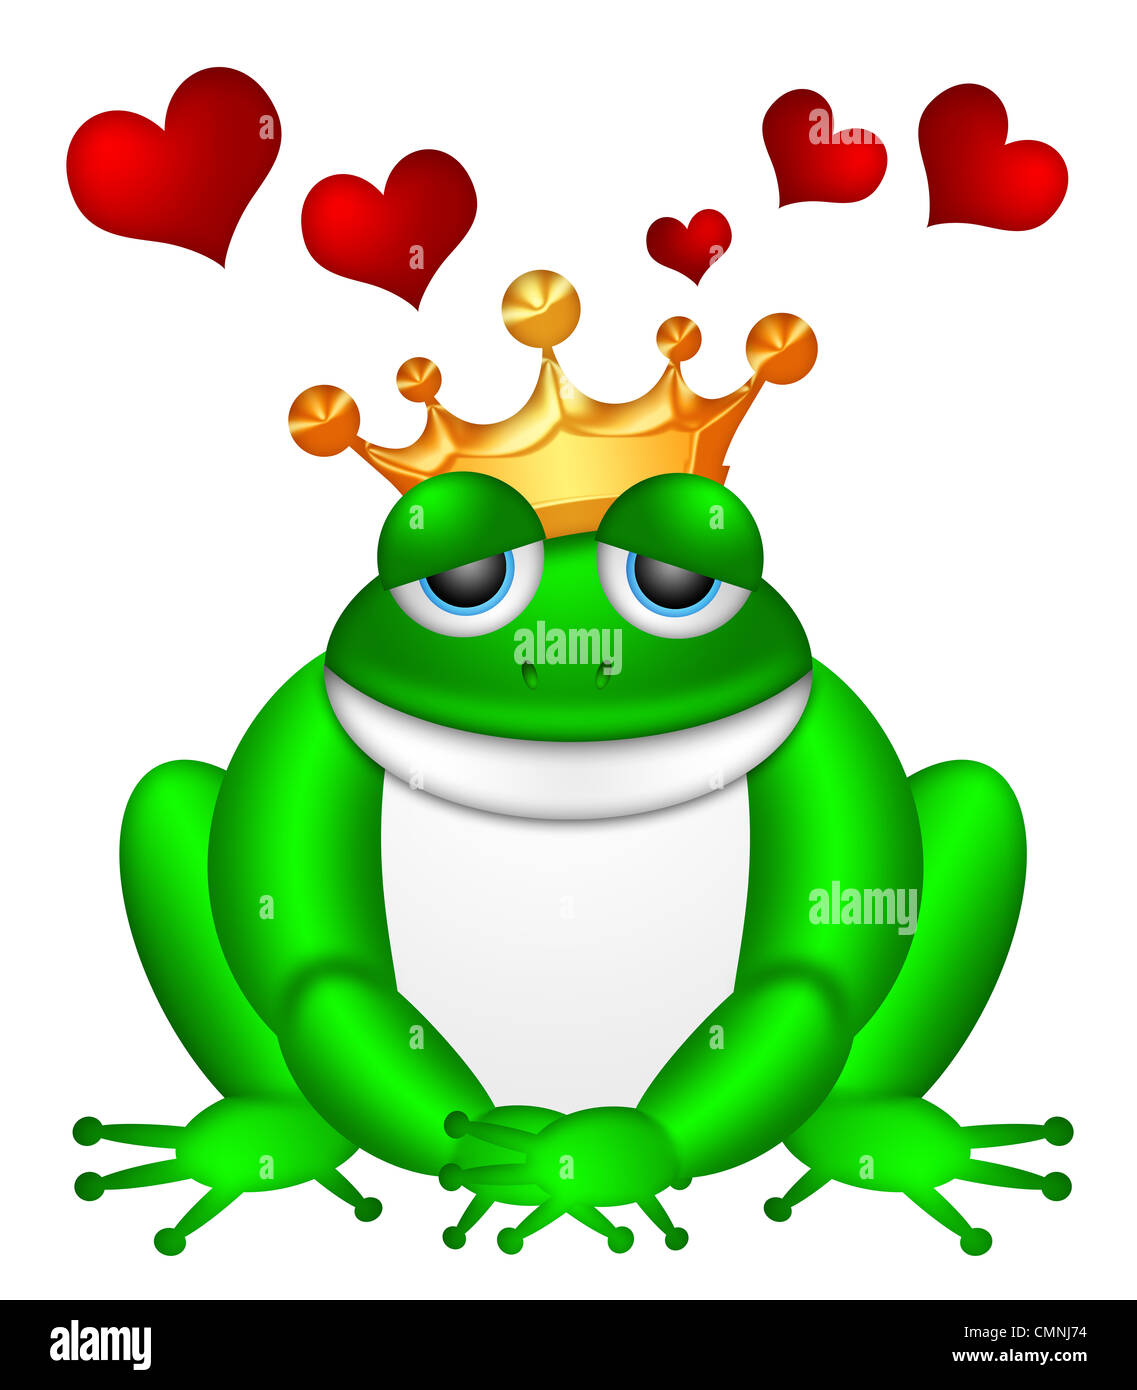 Cute Green Frog Prince with Crown Sitting Illustration Isolated on White Background with Flying Red Hearts Stock Photo